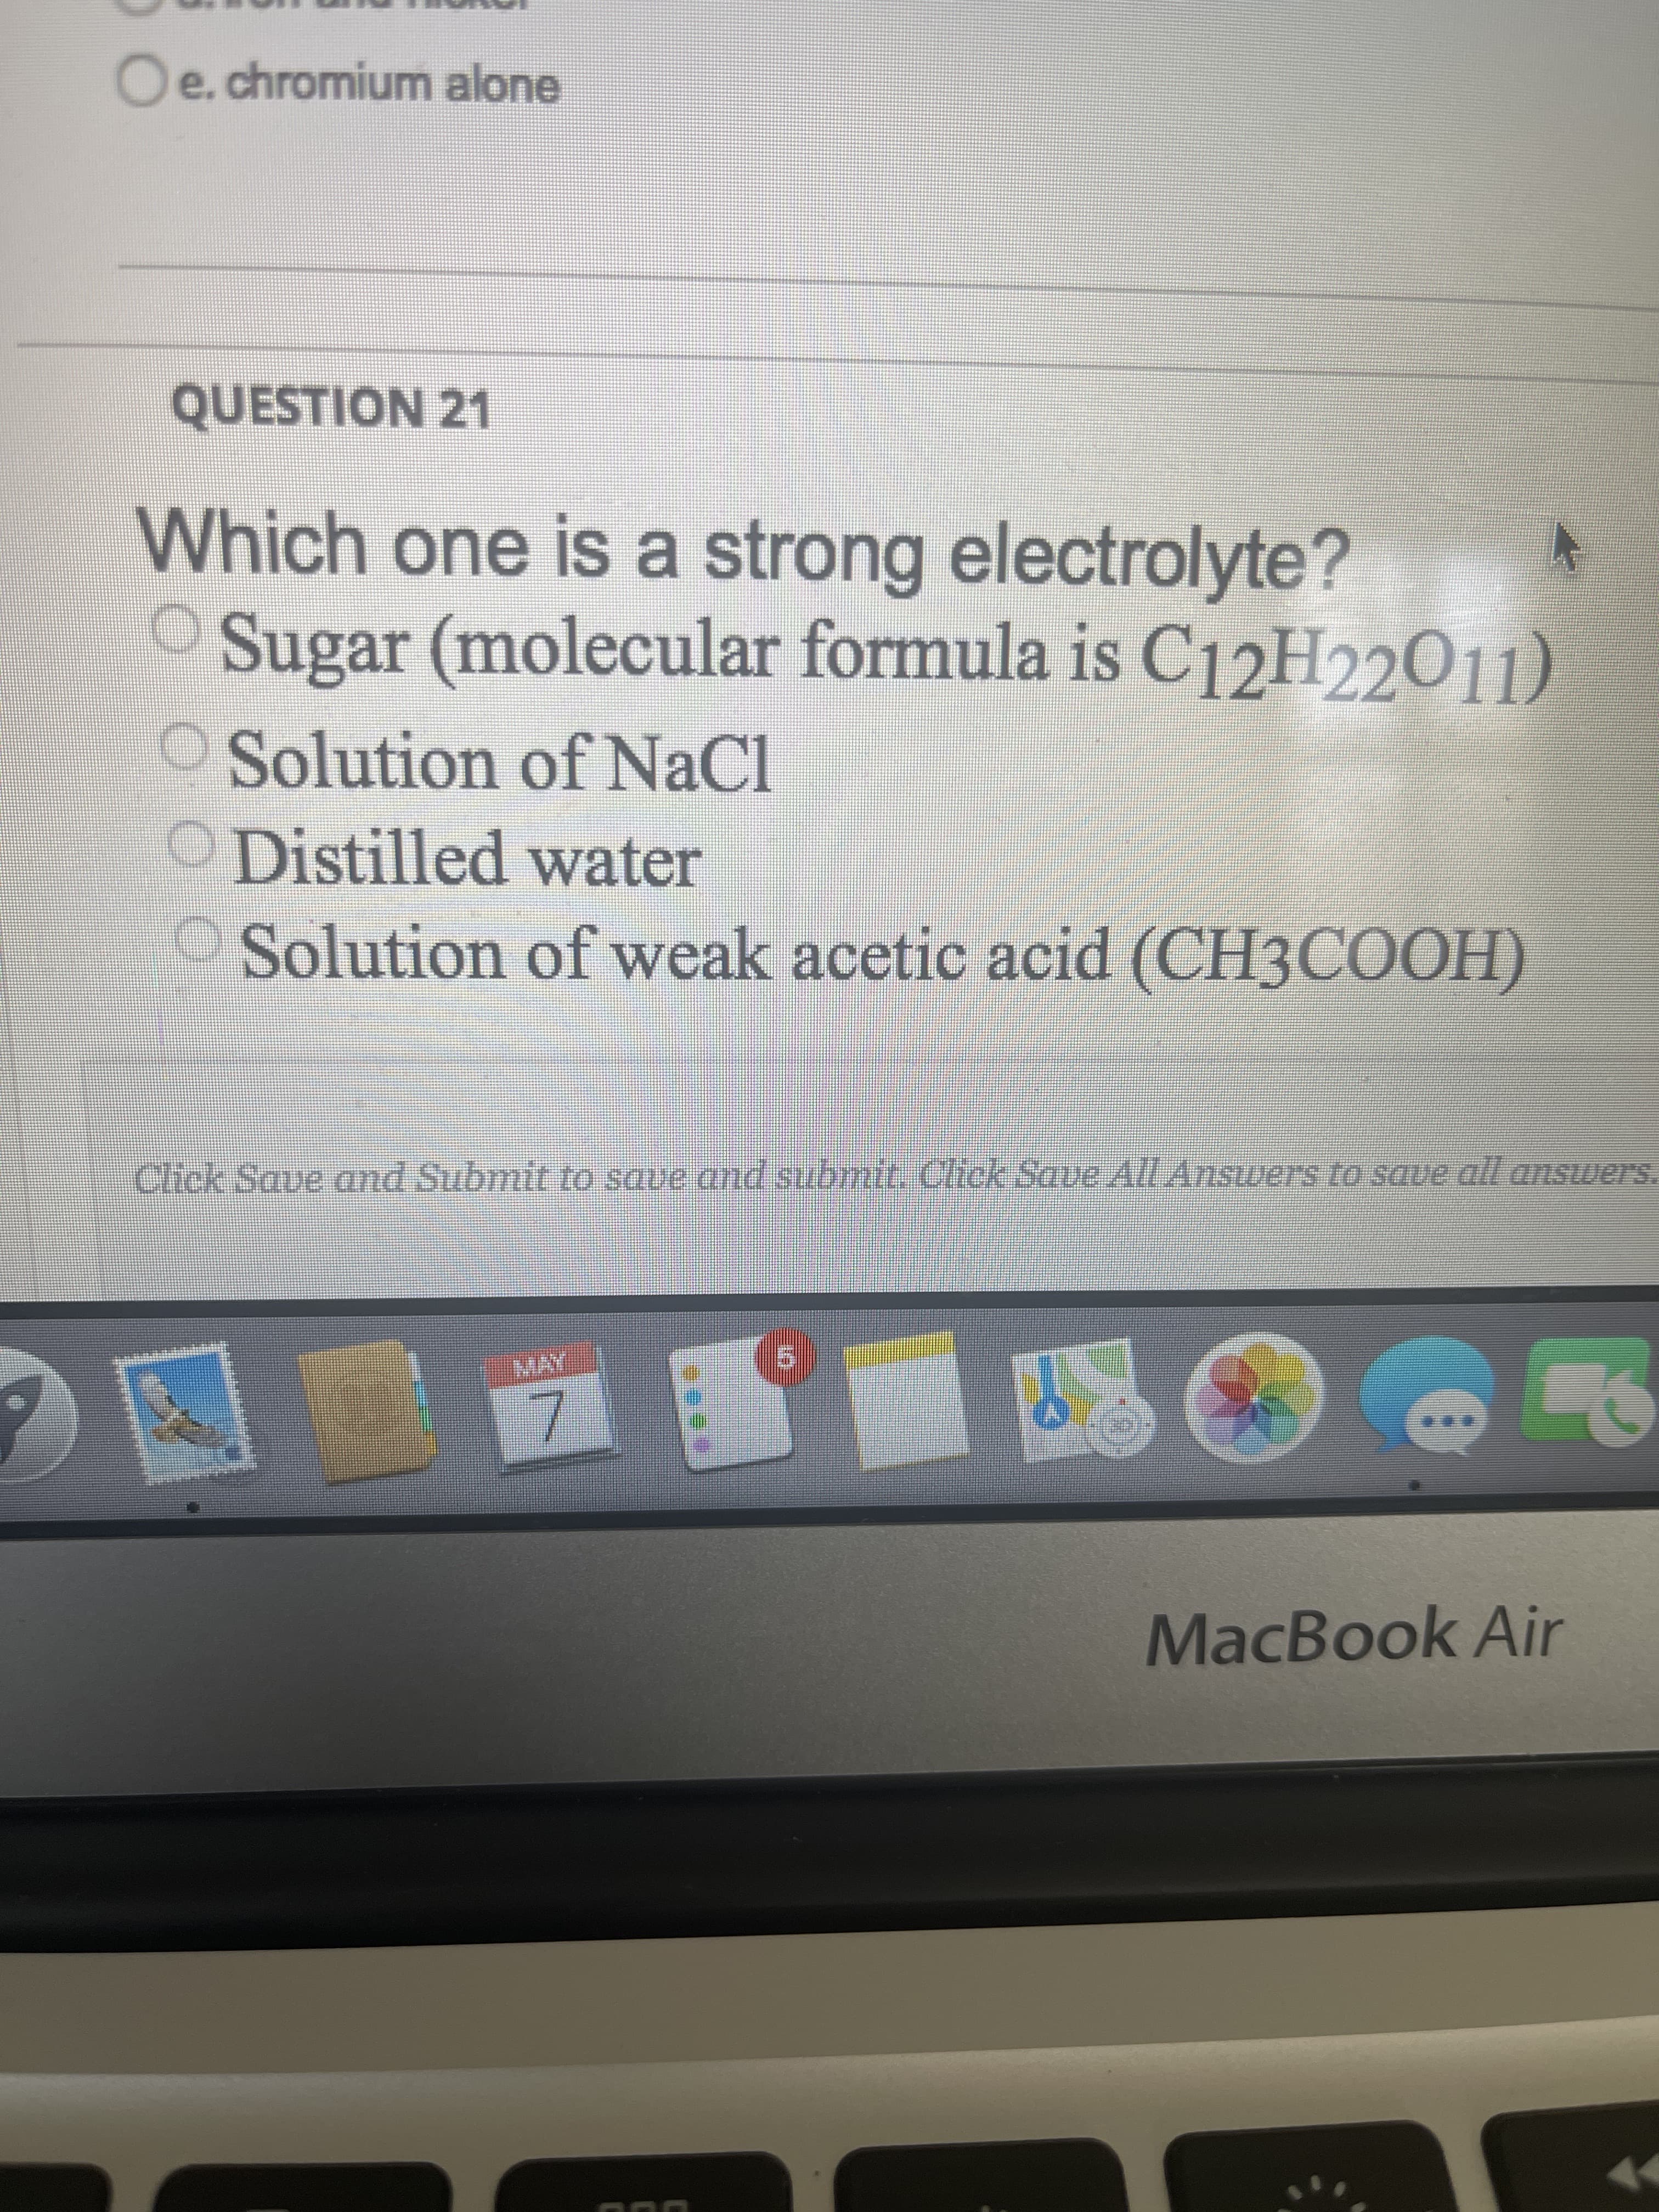 7.
Oe.chromium alone
QUESTION 21
Which one is a strong electrolyte?
O Sugar (molecular formula is C12H22O11)
OSolution of NaCl
ODistilled water
Solution of weak acetic acid (CH3COOH)
Click Save and Submit to save and submit. Click Save All Answers to saue all answers.
MacBook Air
